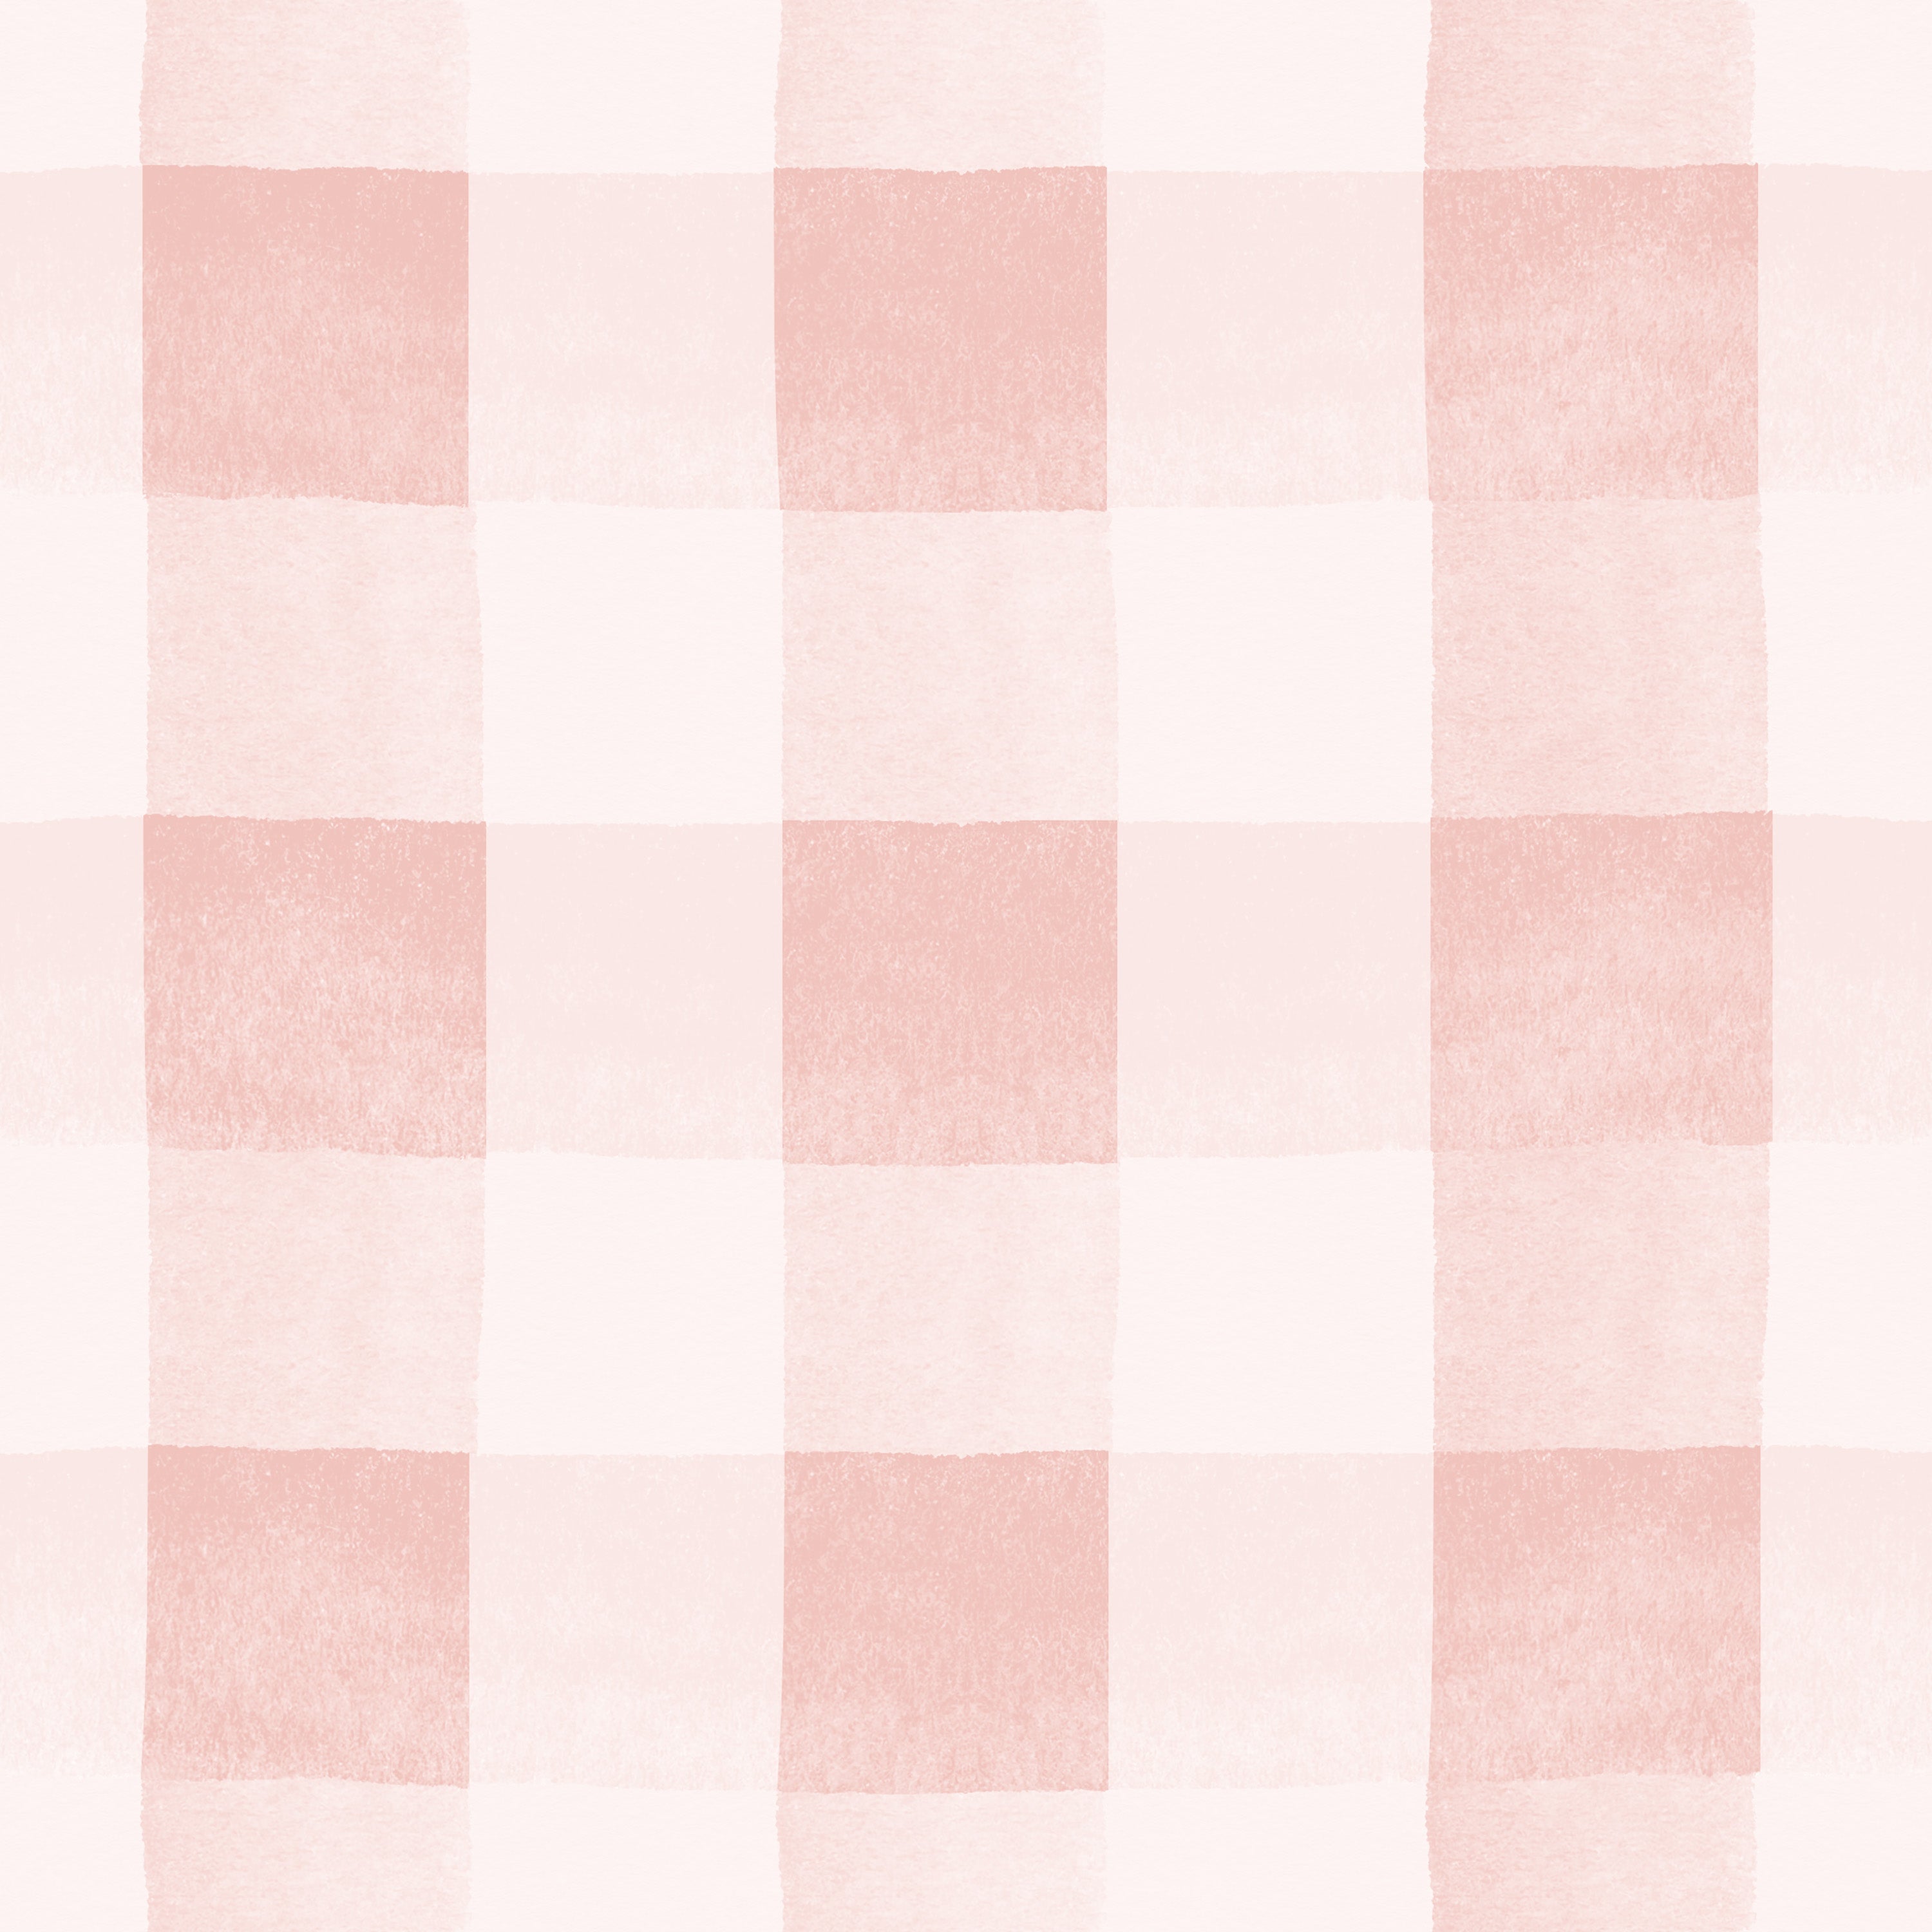 Close-up view of the Camille Wallpaper showcasing its checkered pattern in dusty pink shades. The subtle texture and soft hues offer a classic yet contemporary look, perfect for adding a touch of elegance to any room.